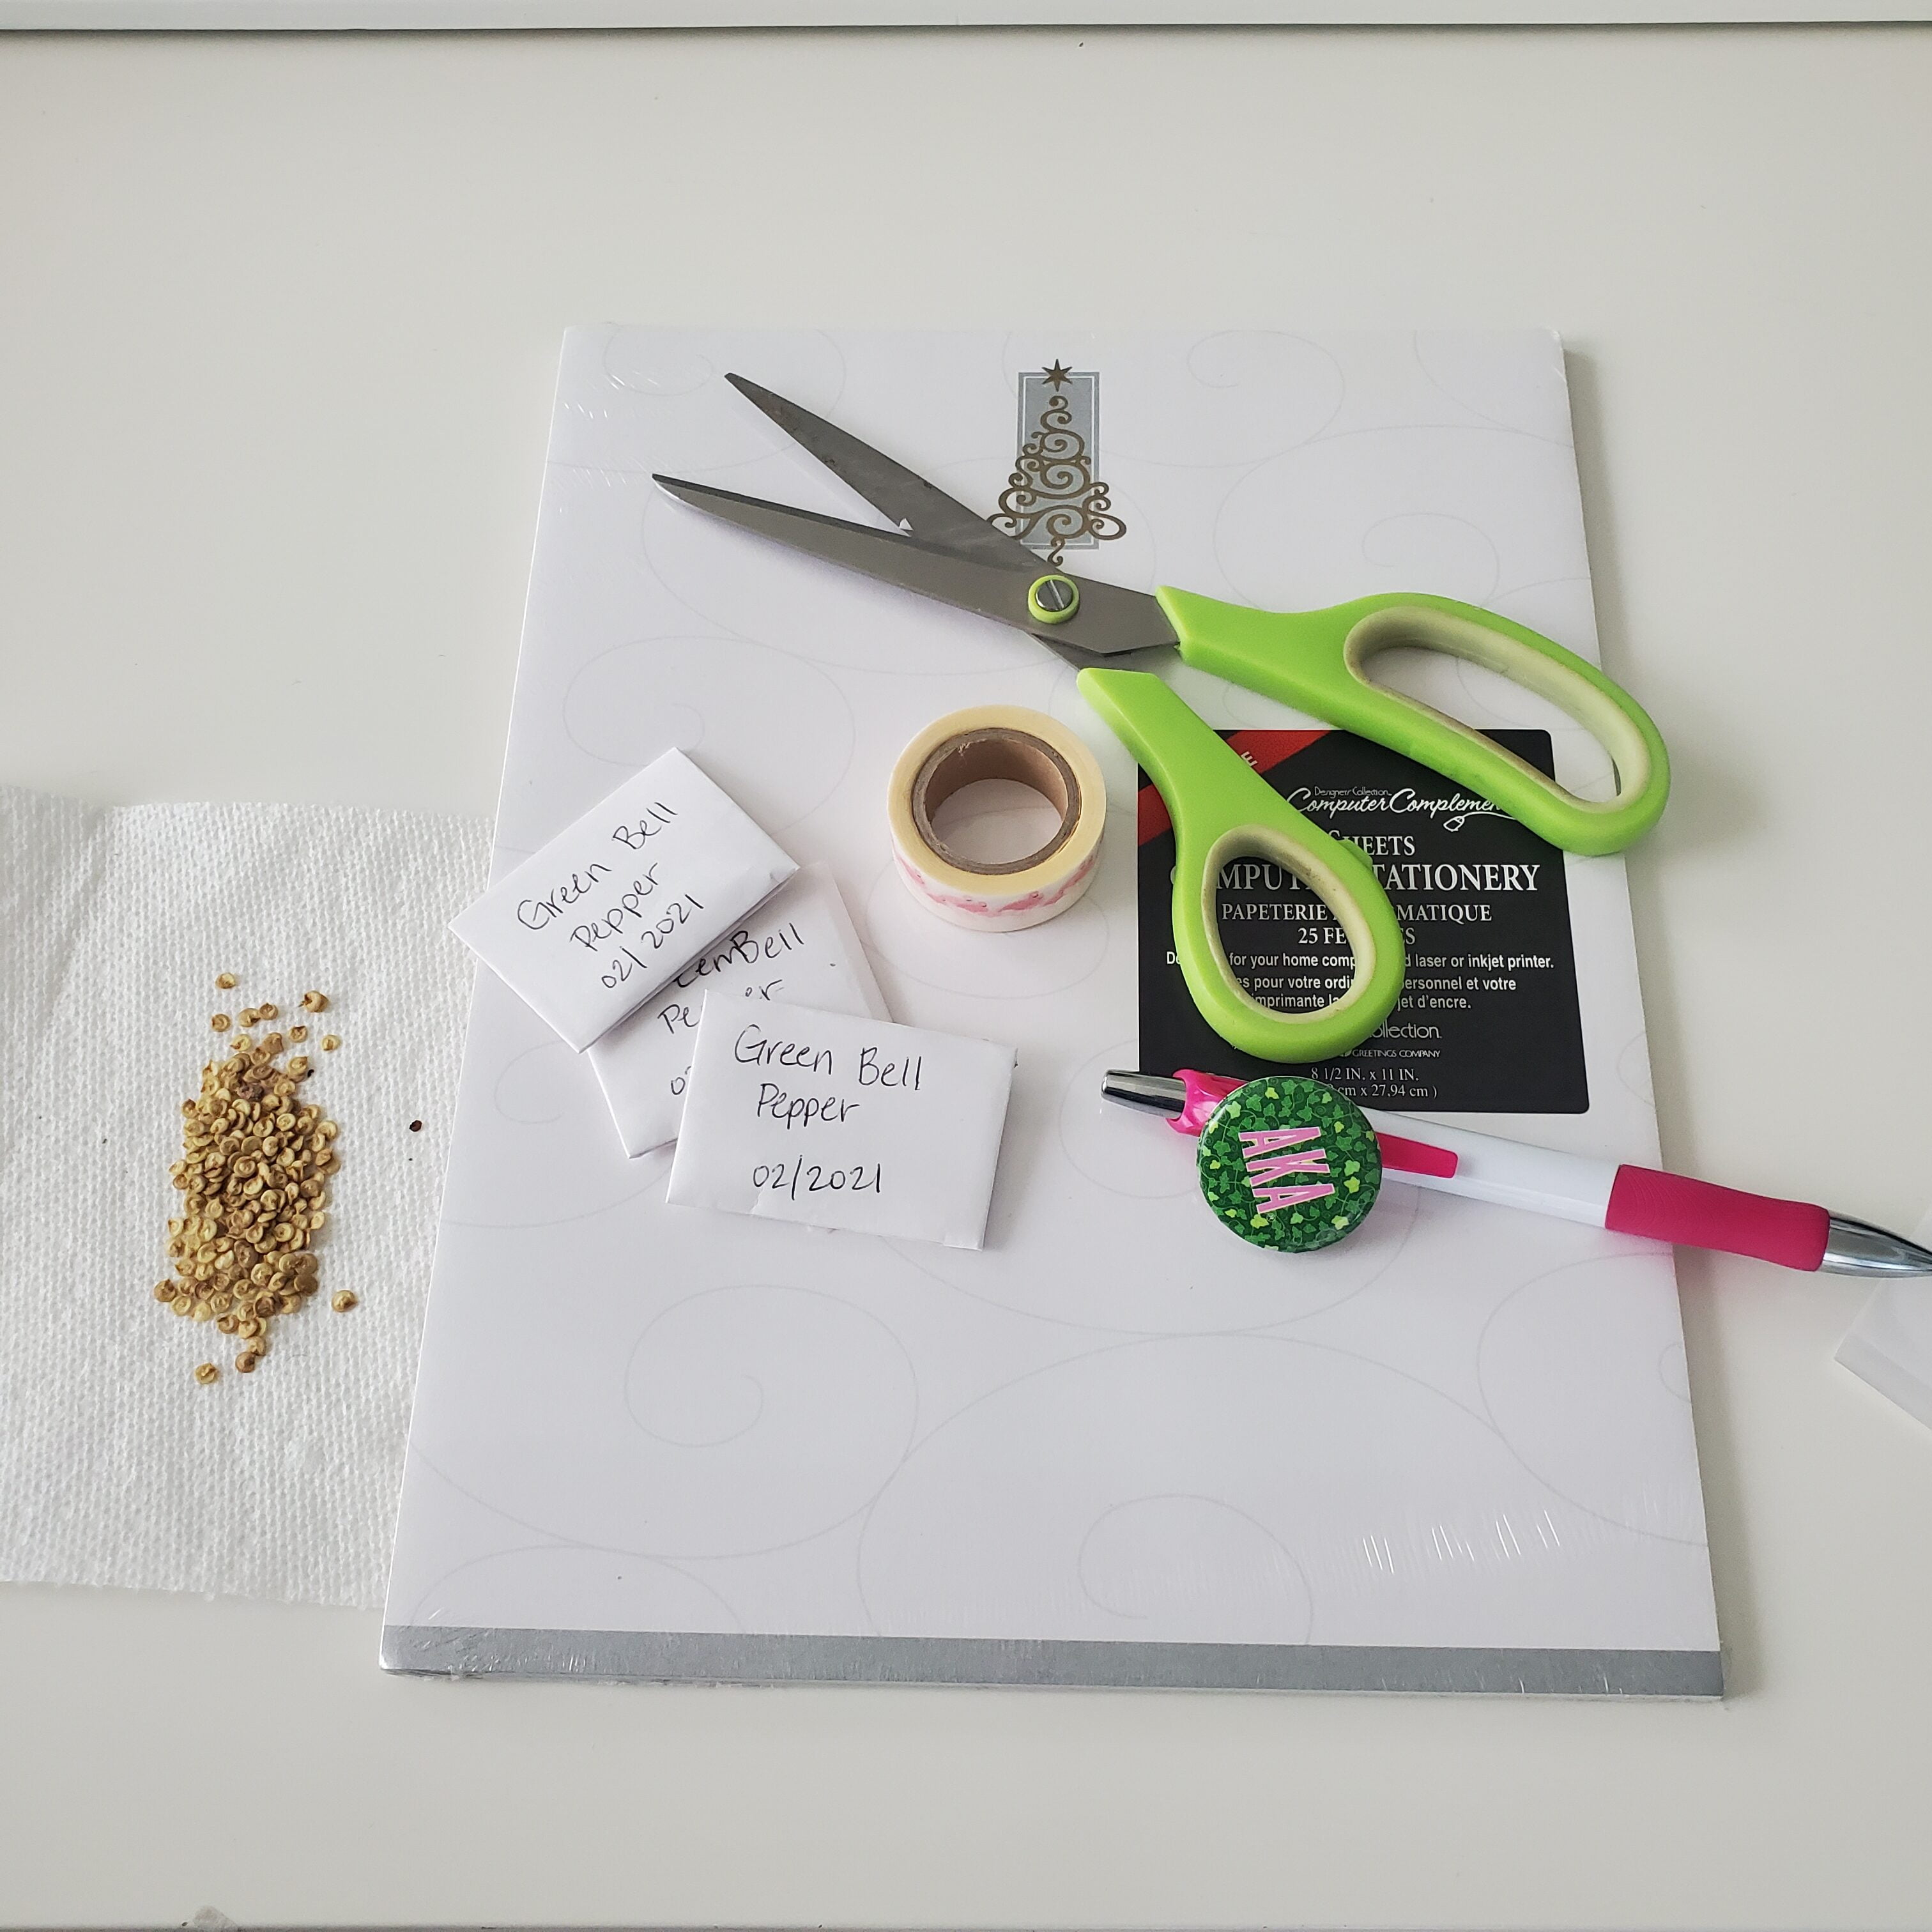 How to make seed envelopes for free